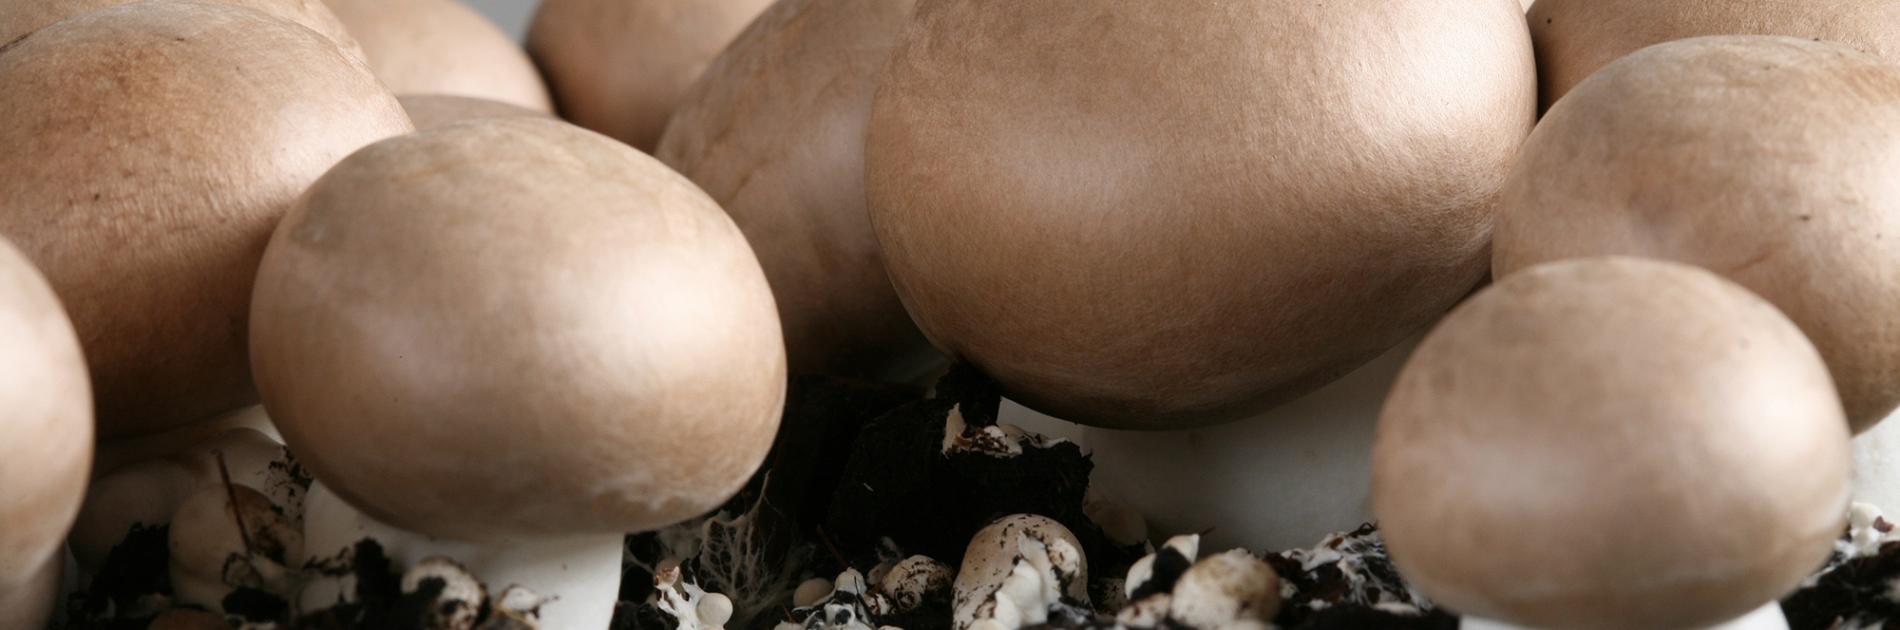 Additional vitamin D in Limax mushrooms